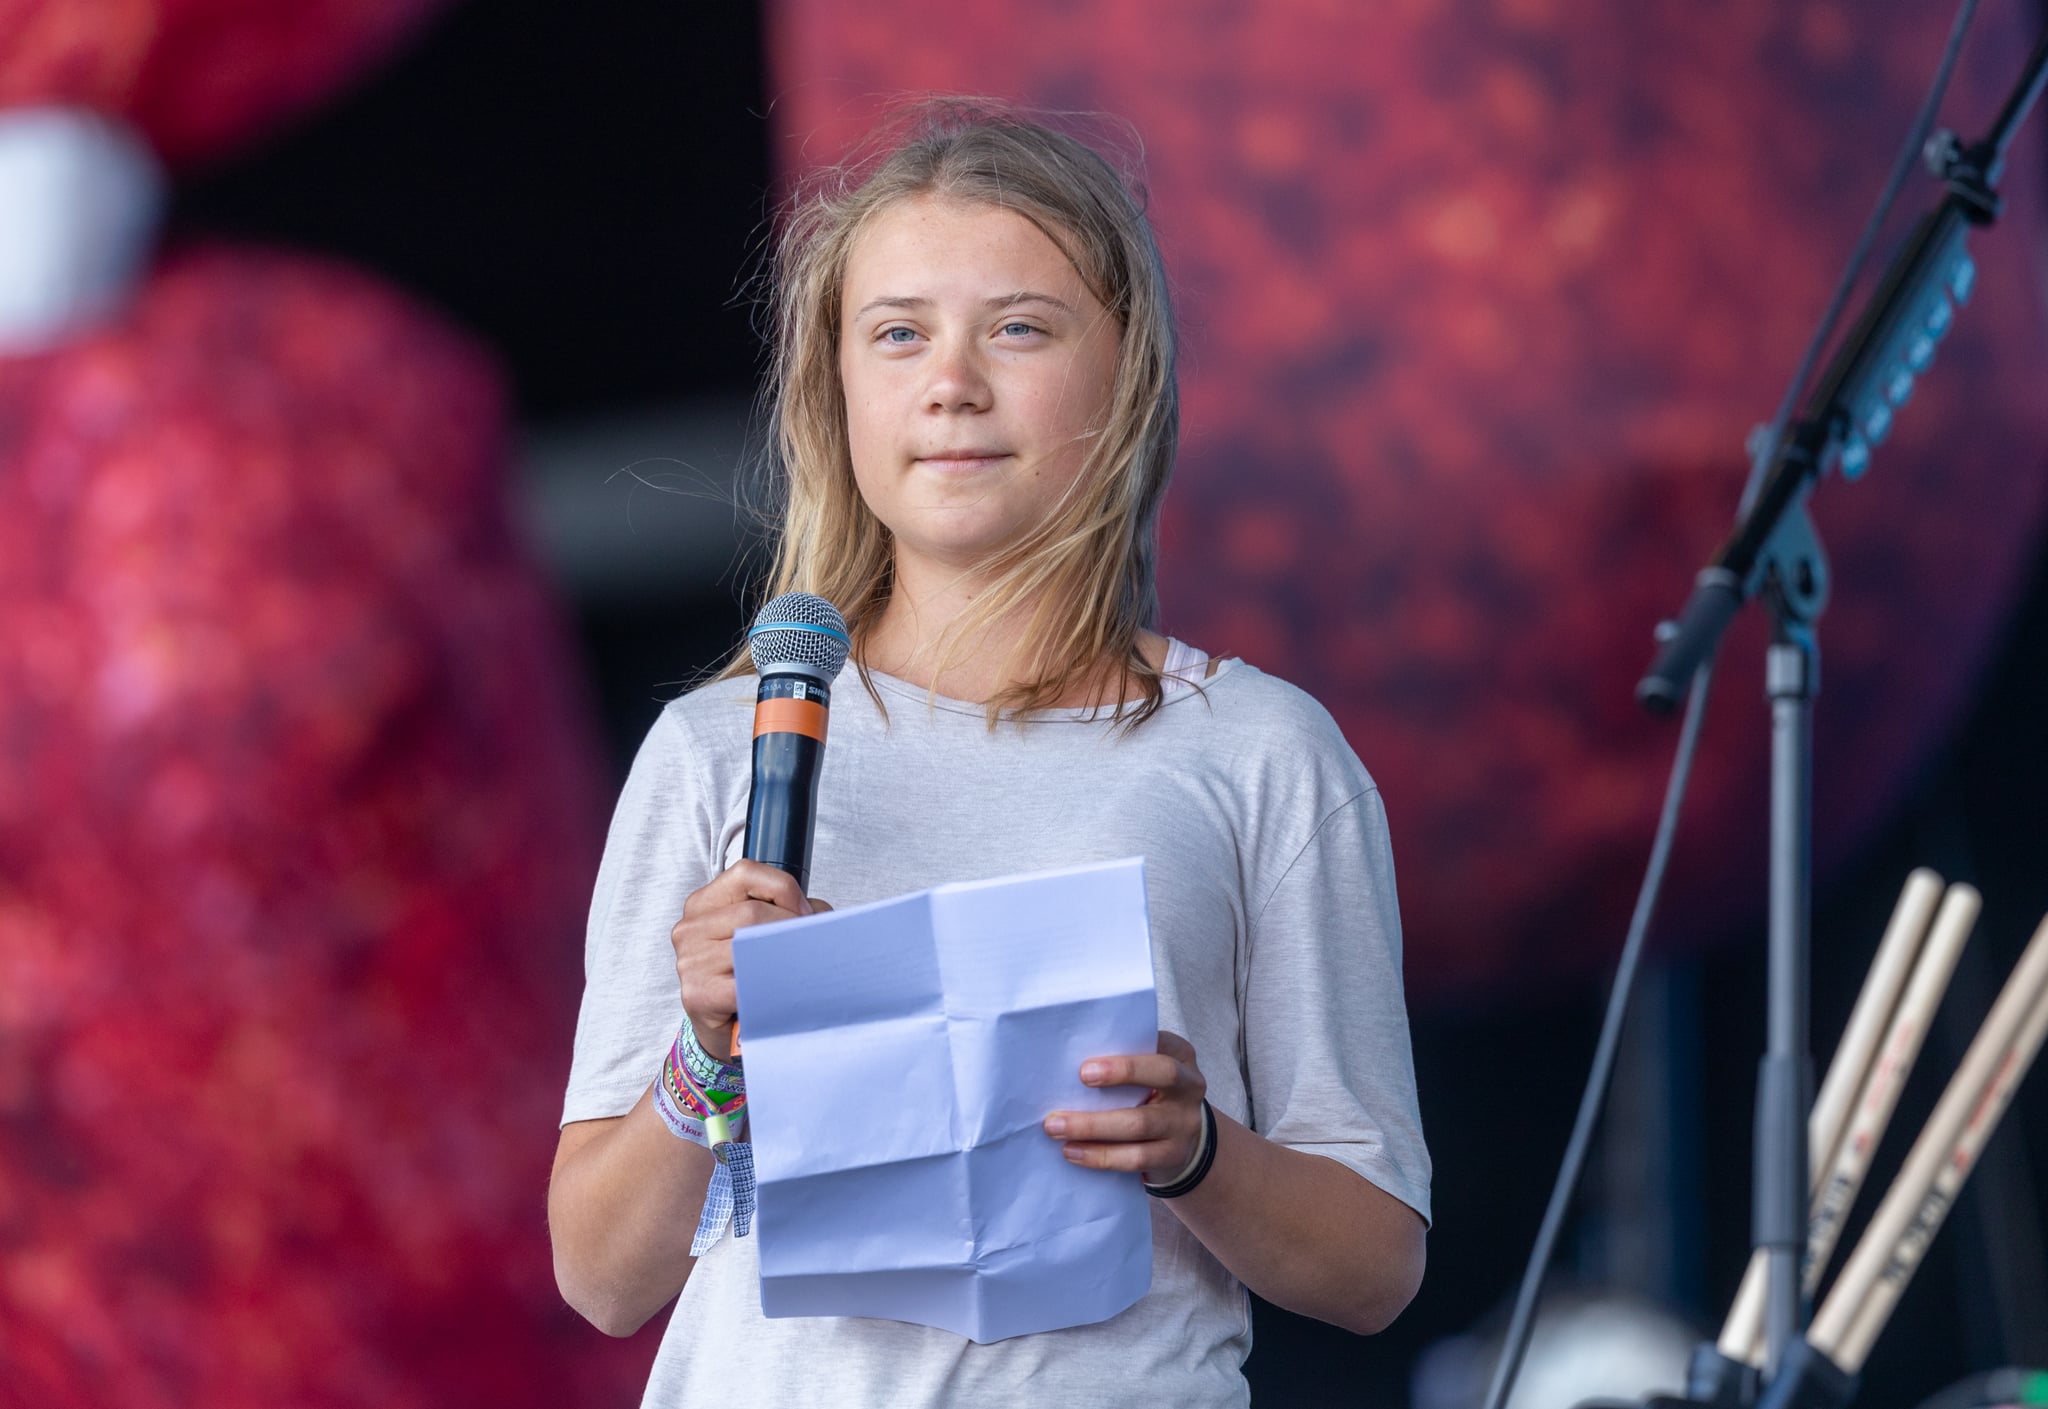 GLASTONBURY, ENGLAND - JUNE 25:  Greta Thunberg speaks to the crowd from the main Pyramid Stage at the 2022 Glastonbury Festival during day four of the Glastonbury Festival at Worthy Farm, Pilton on June 25, 2022 in Glastonbury, England. The festival, founded in 1970, has grown into one of the largest outdoor green field festivals in the world.  (Photo by Matt Cardy/Getty Images)